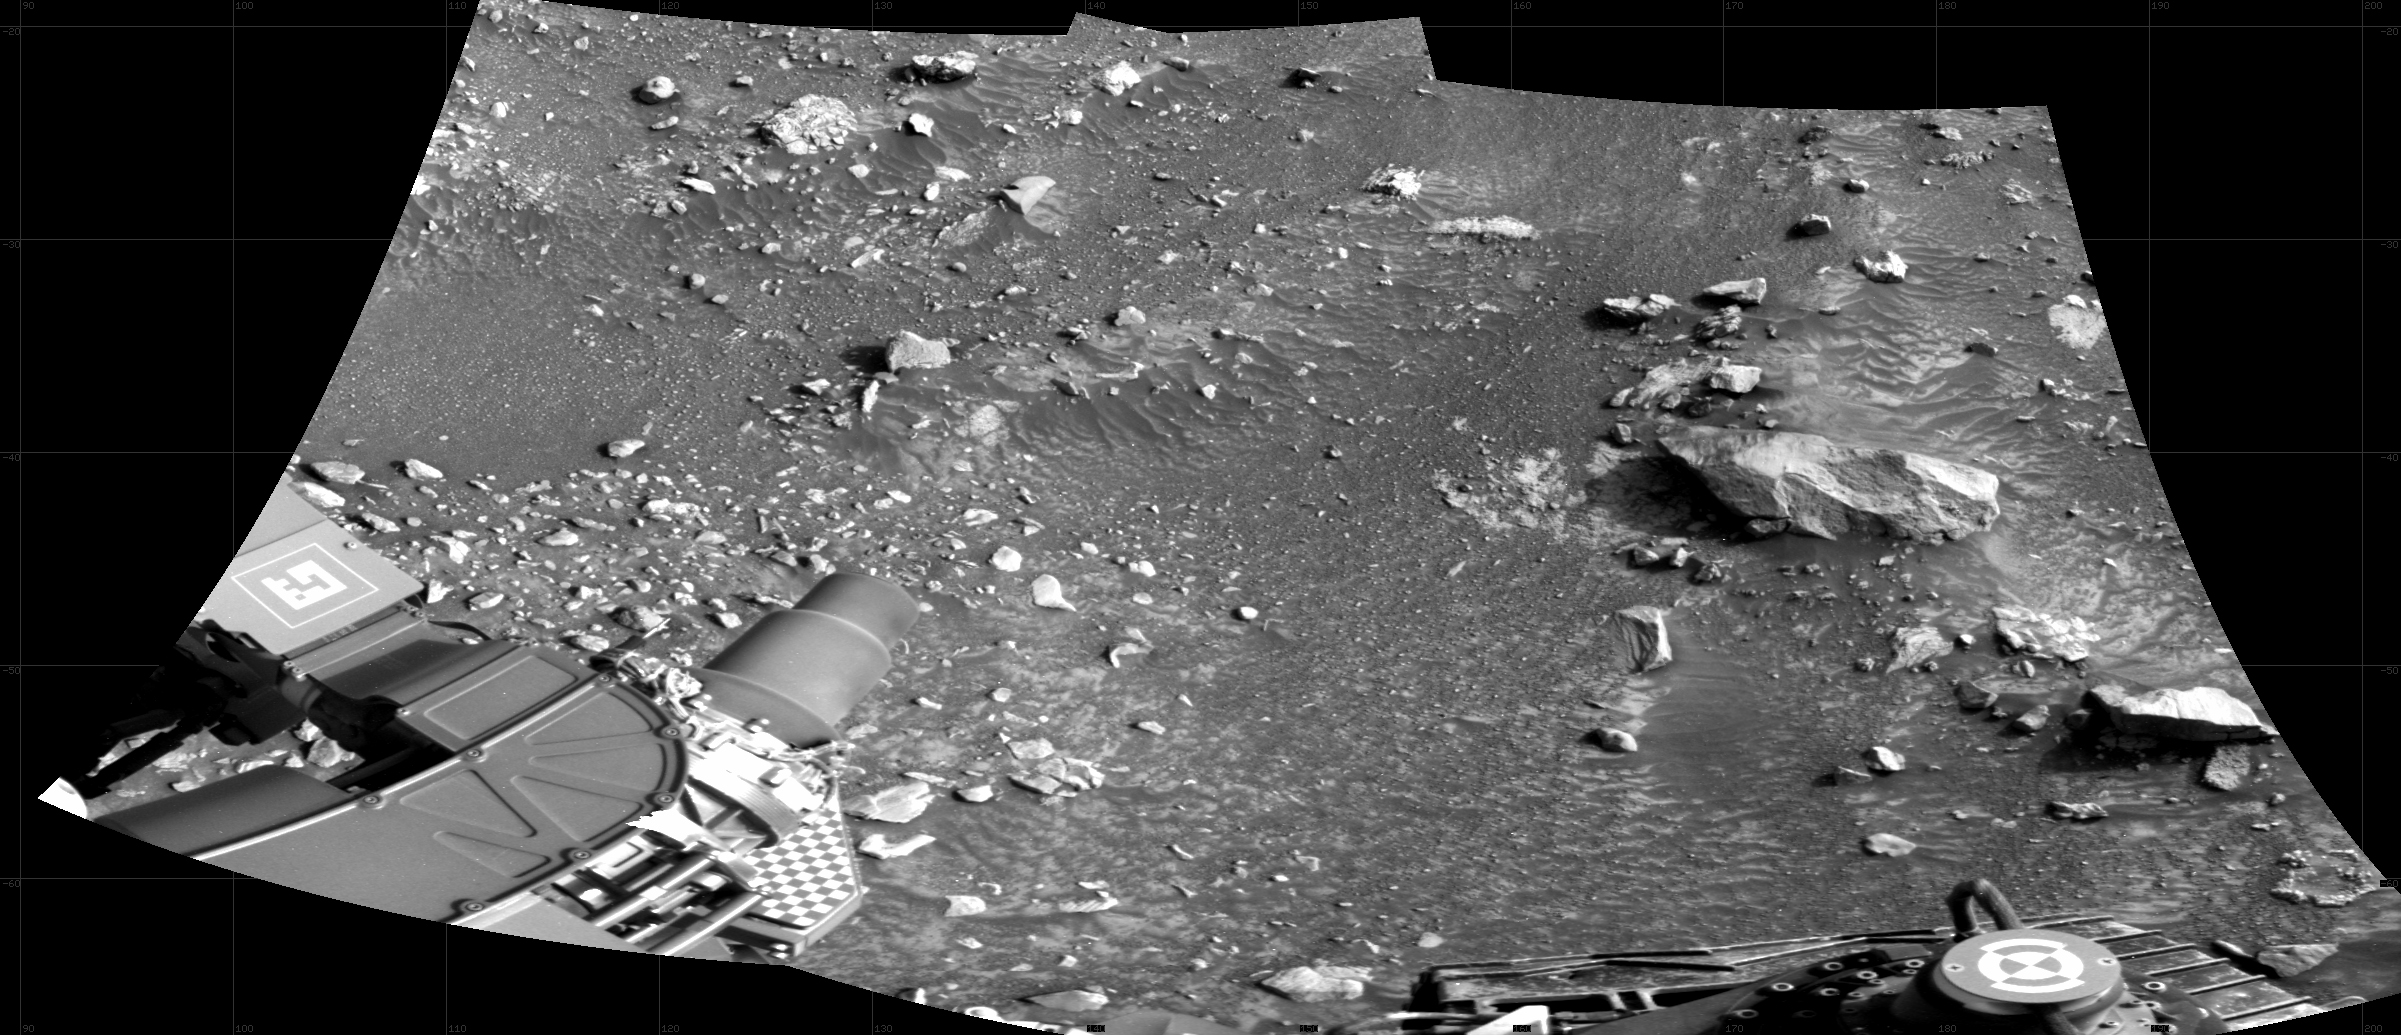 Curiosity took the images on May 21, 2024, Sol 4191 of the Mars Science Laboratory mission at drive 1952, site number 107. The local mean solar time for the image exposures was 3 PM.